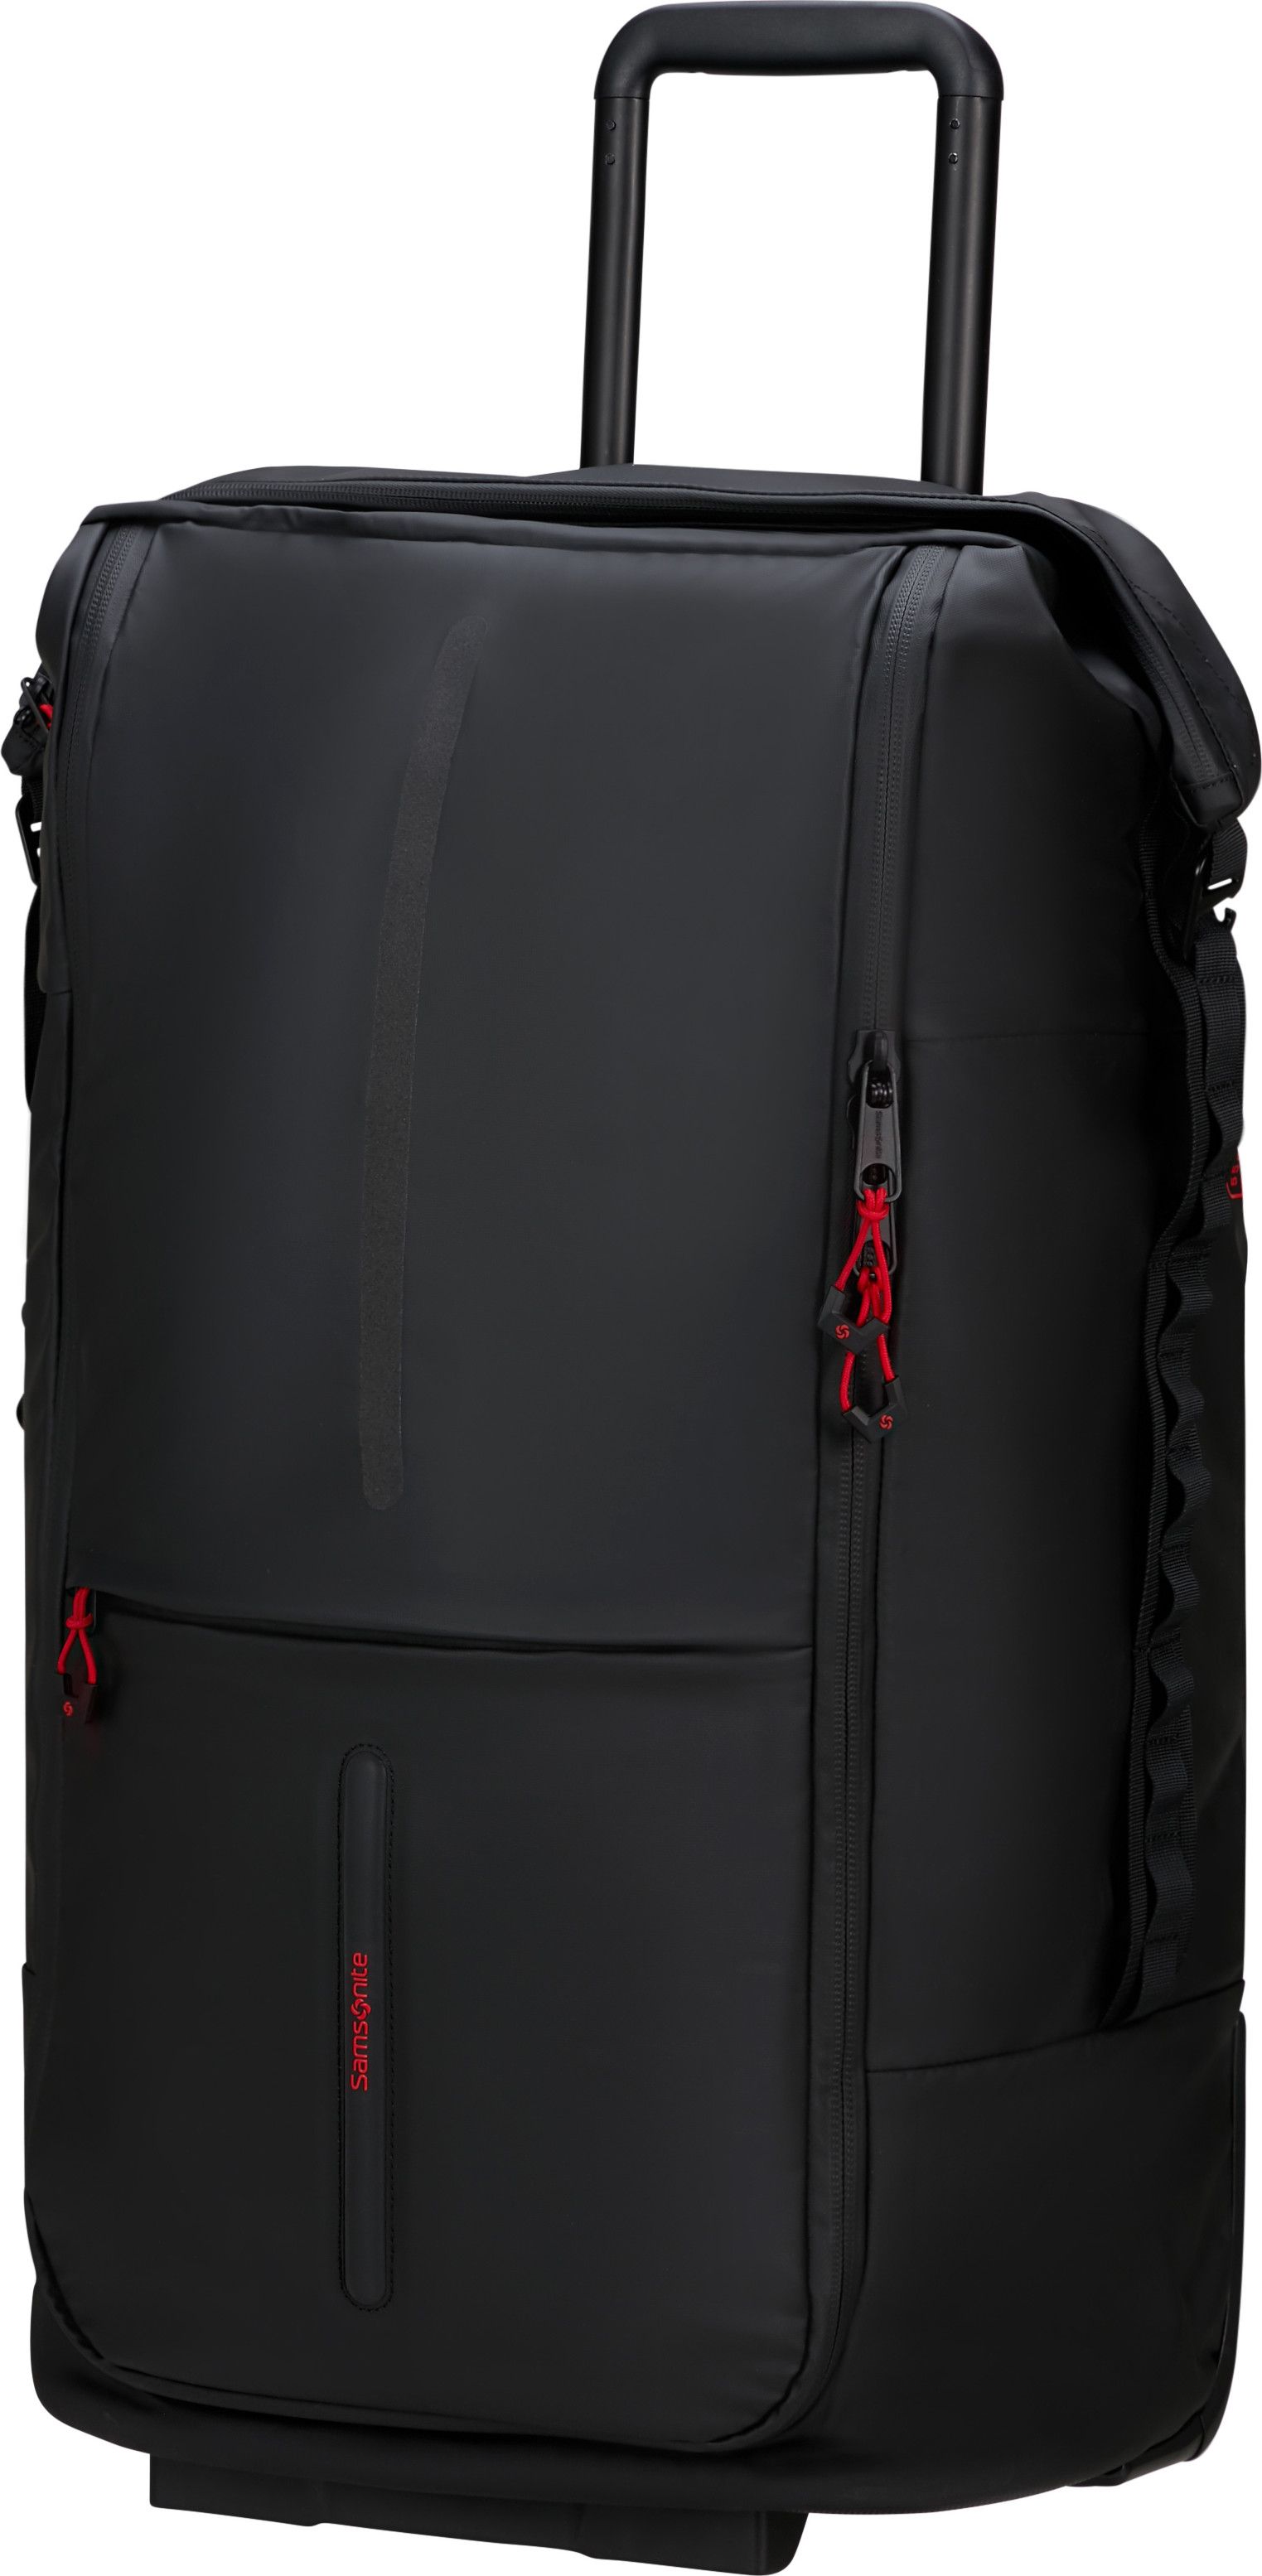 Samsonite Ecodiver Foldable Duffle With Wheels 4-In-1 Black